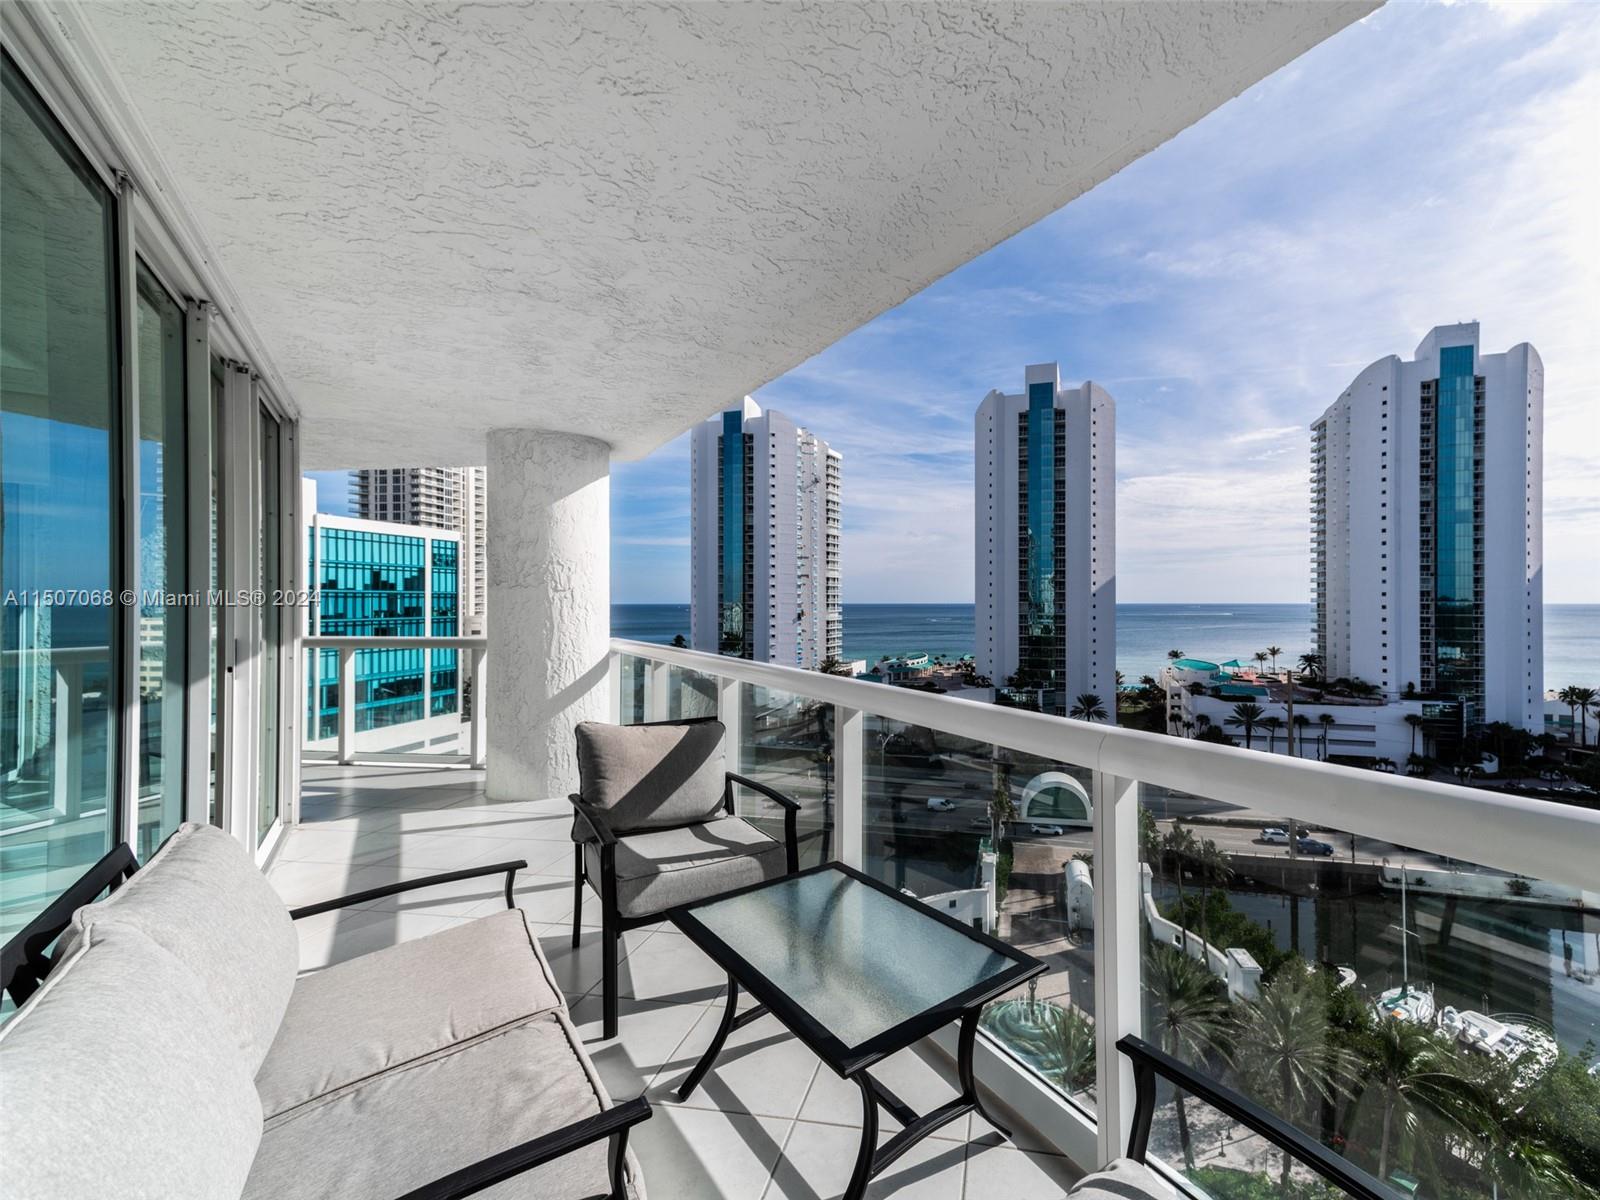 Stunning 2/2 in the exclusive Sunny Isles Beach. In this unit you're greeted by an abundance of natural light & SE views of both the ocean and intracoastal through floor-to-ceiling windows. Every room boasts a private balcony. Enjoy the open living space & kitchen with separate living and dining rooms. Primary bedroom features a large walk-in closet and a lavish en-suite bathroom. New s/s appliances and furniture negotiable. Outside, Oceania IV offers amenities, including a beach club, health spa, beauty salon, marina, oceanfront restaurants, private beach and pool services, racquetball, basketball, tennis courts, and an oceanfront gym, steam room and fitness classes. The guard-gated island provides 24-hour security, concierge services, and valet parking. Available for 6 months rental.